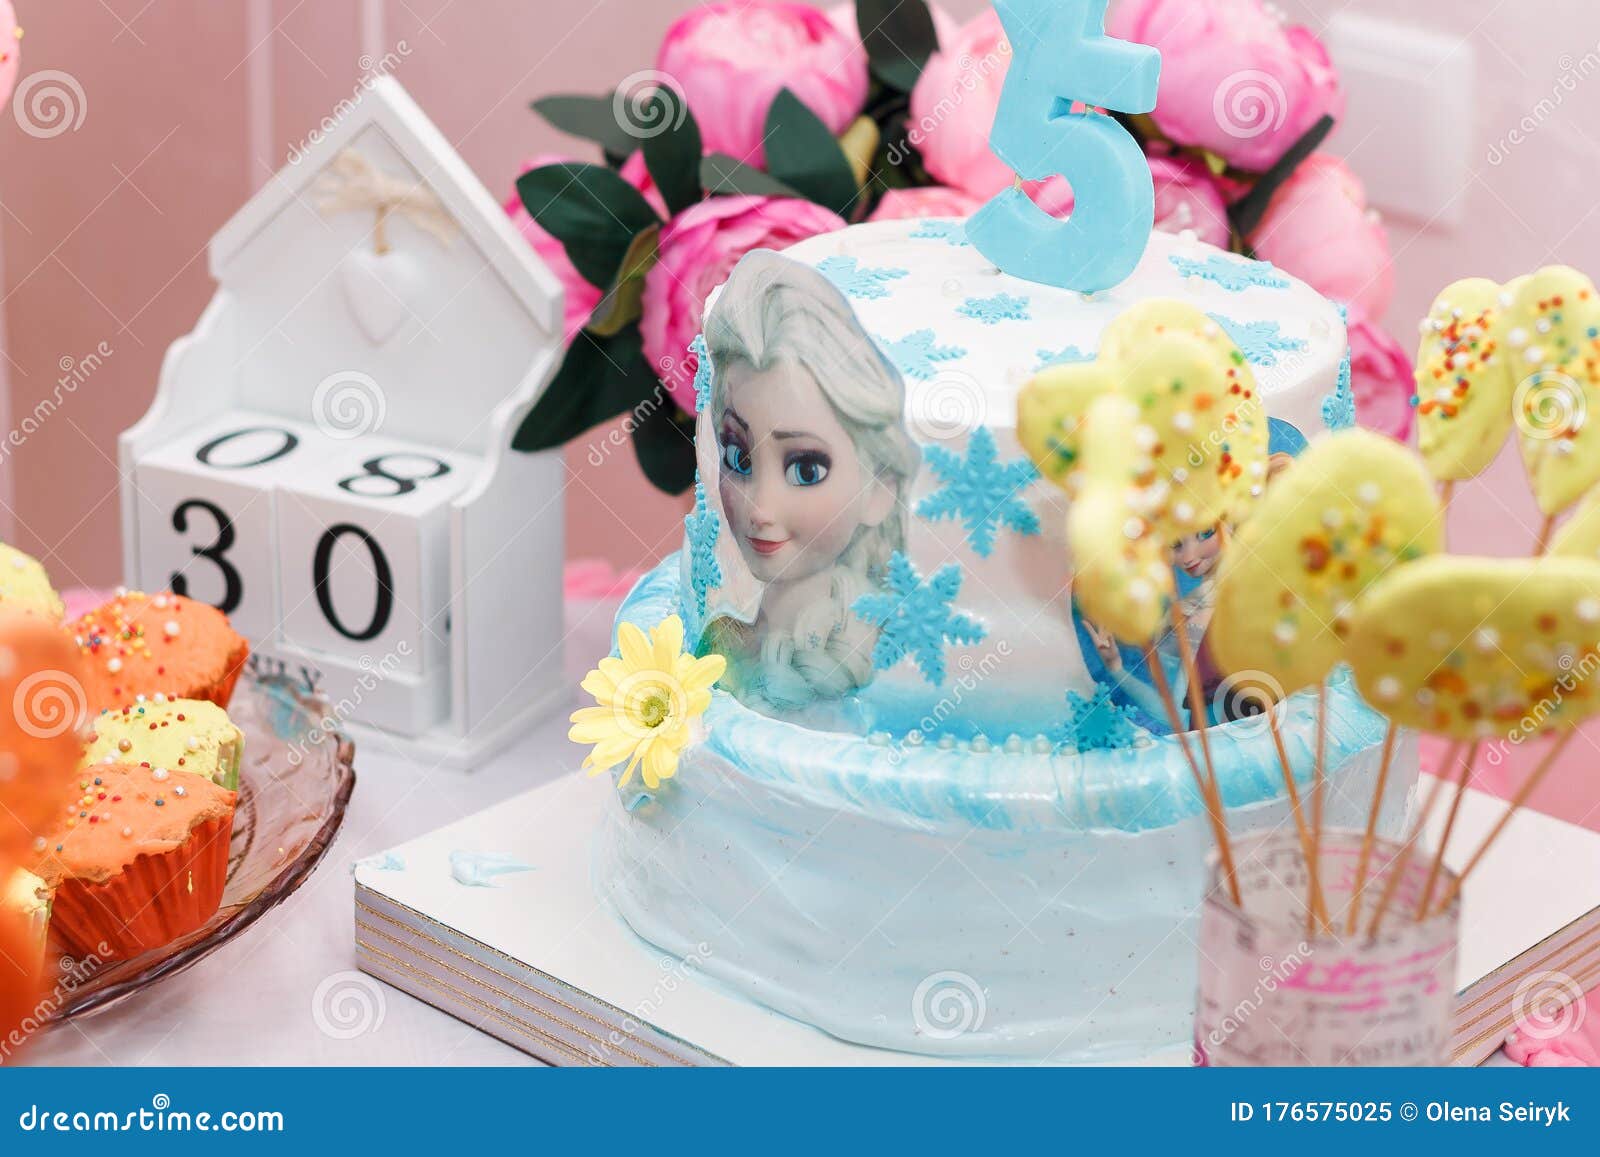 Candy Bar, Birthday Cake for a Girl with Frozen Cartoon Character  Illustration. Muffins and Flowers Editorial Image - Image of editorial,  disney: 176575025